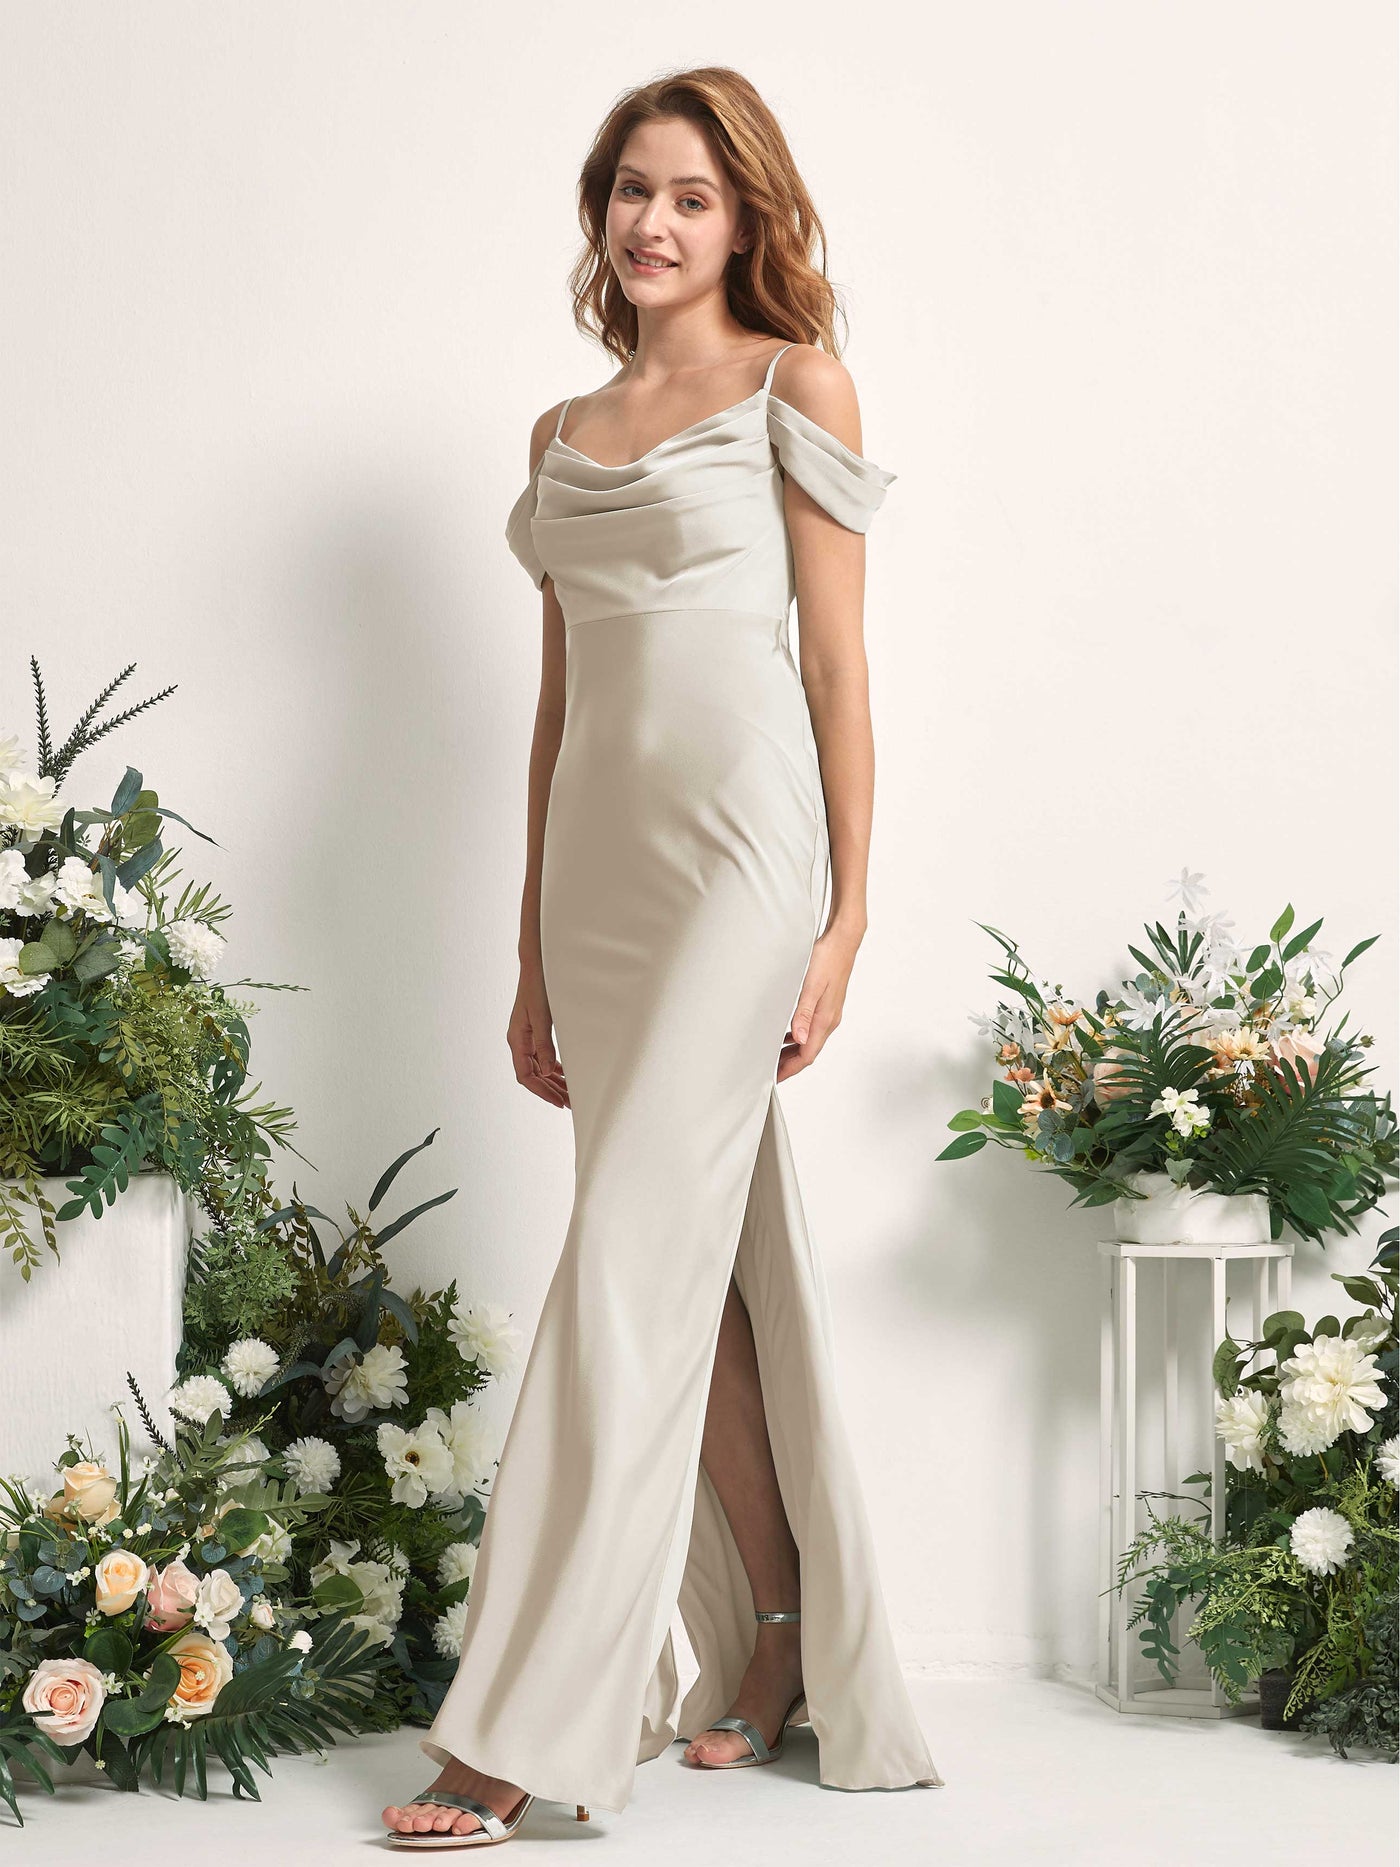 Champagne Bridesmaid Dresses Bridesmaid Dress Mermaid/Trumpet Satin Off Shoulder Full Length Sleeveless Wedding Party Dress (80225304)#color_champagne